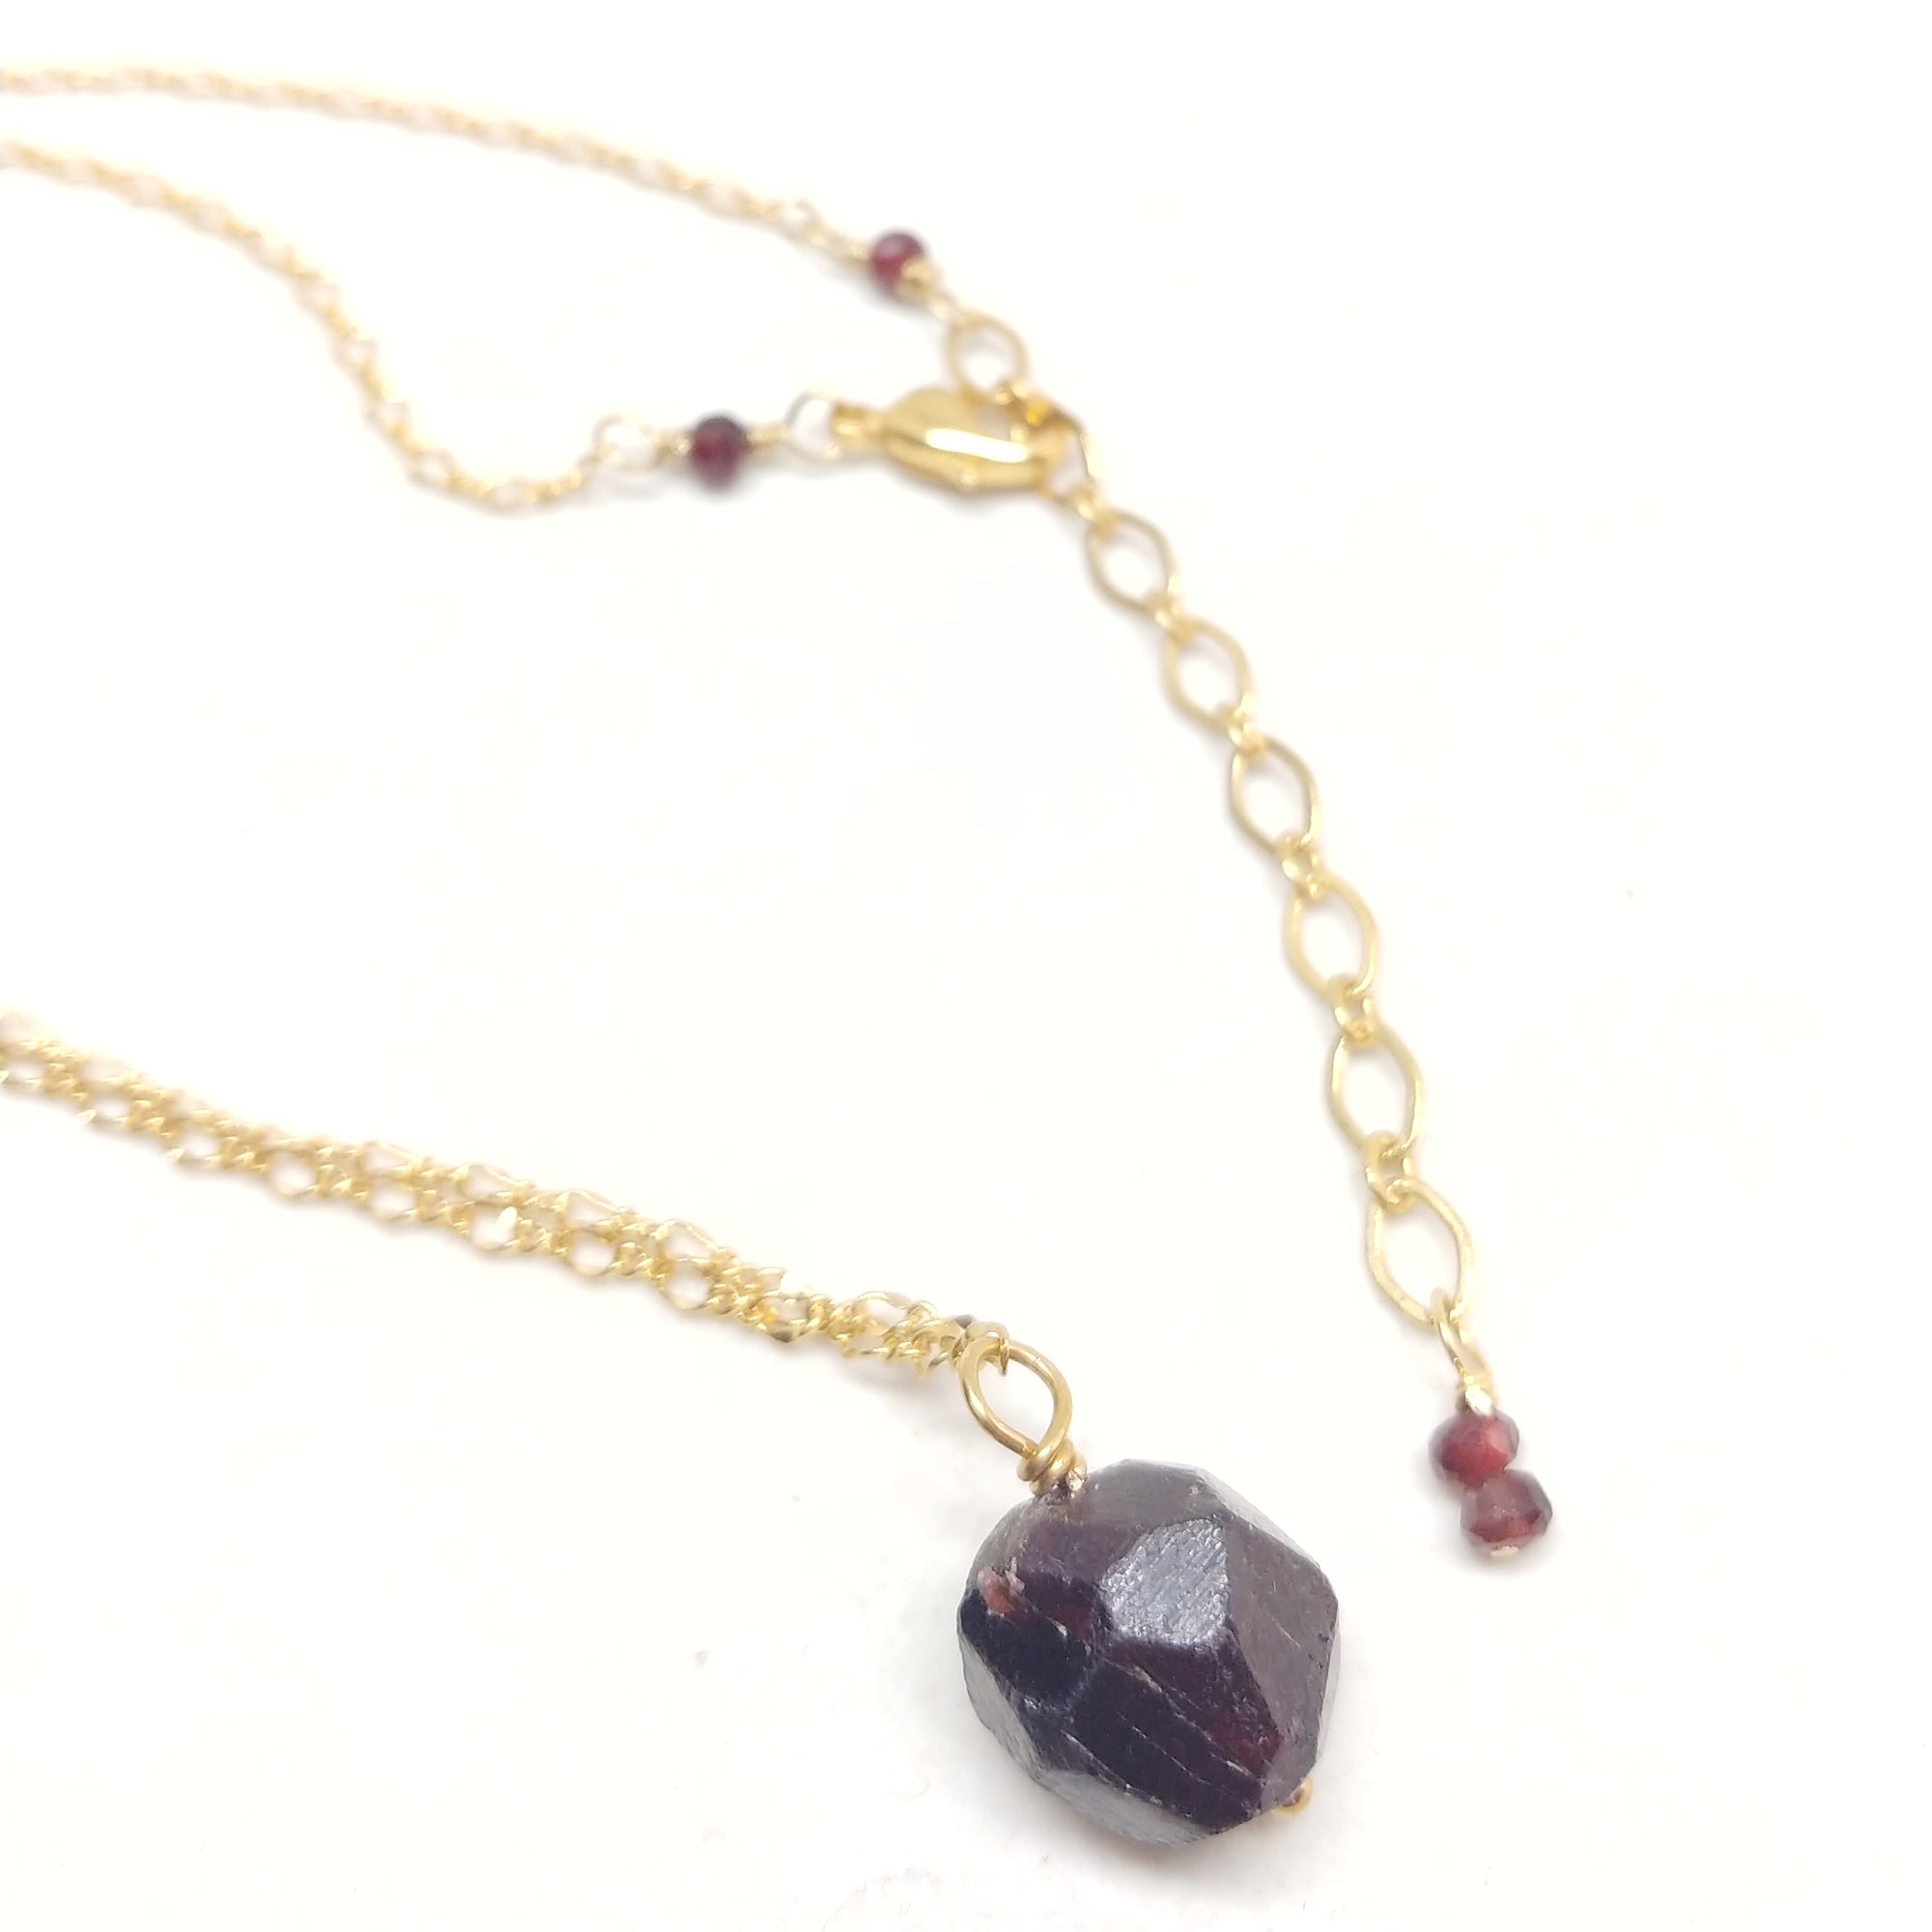 Gold plated delicate chain necklace with a raw garnet bead pendant